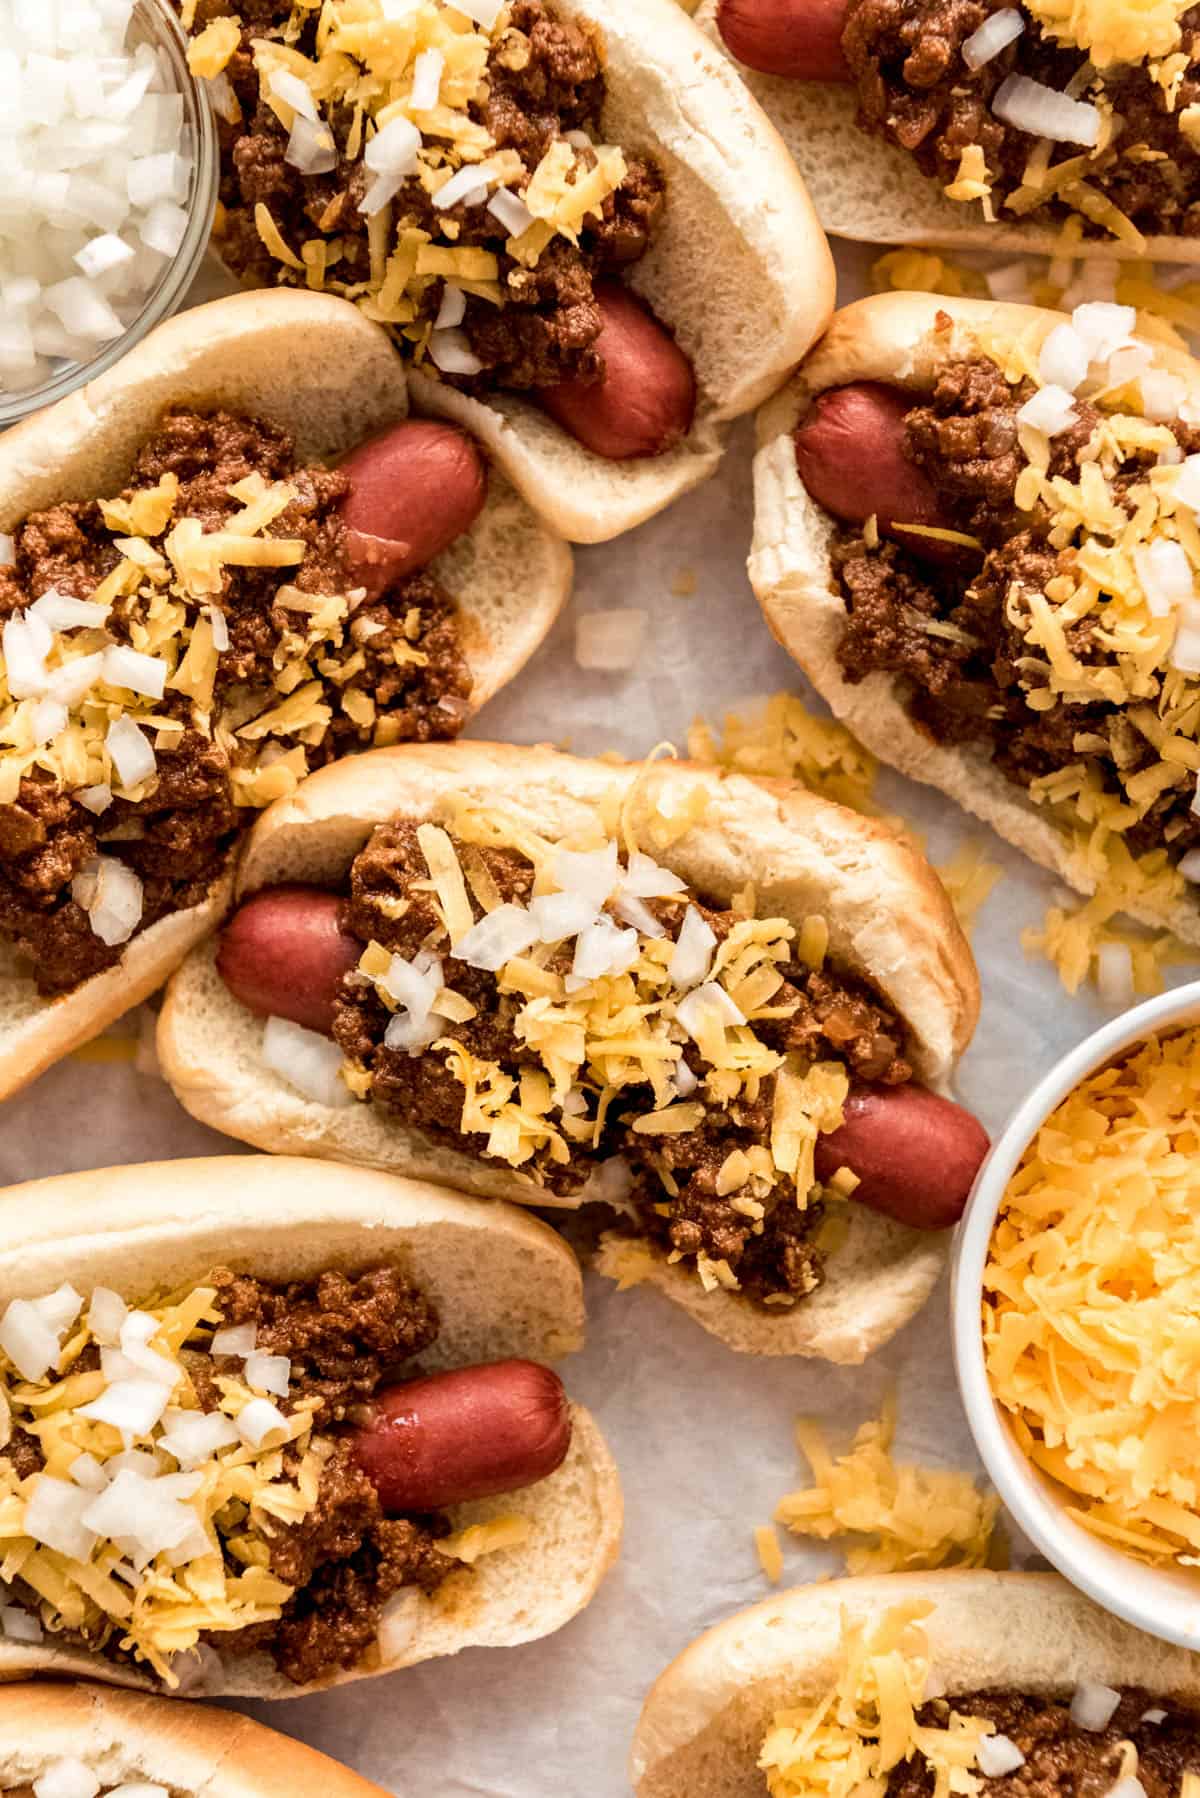 hot dogs on buns covered in meat sauce, shredded cheese, and onions